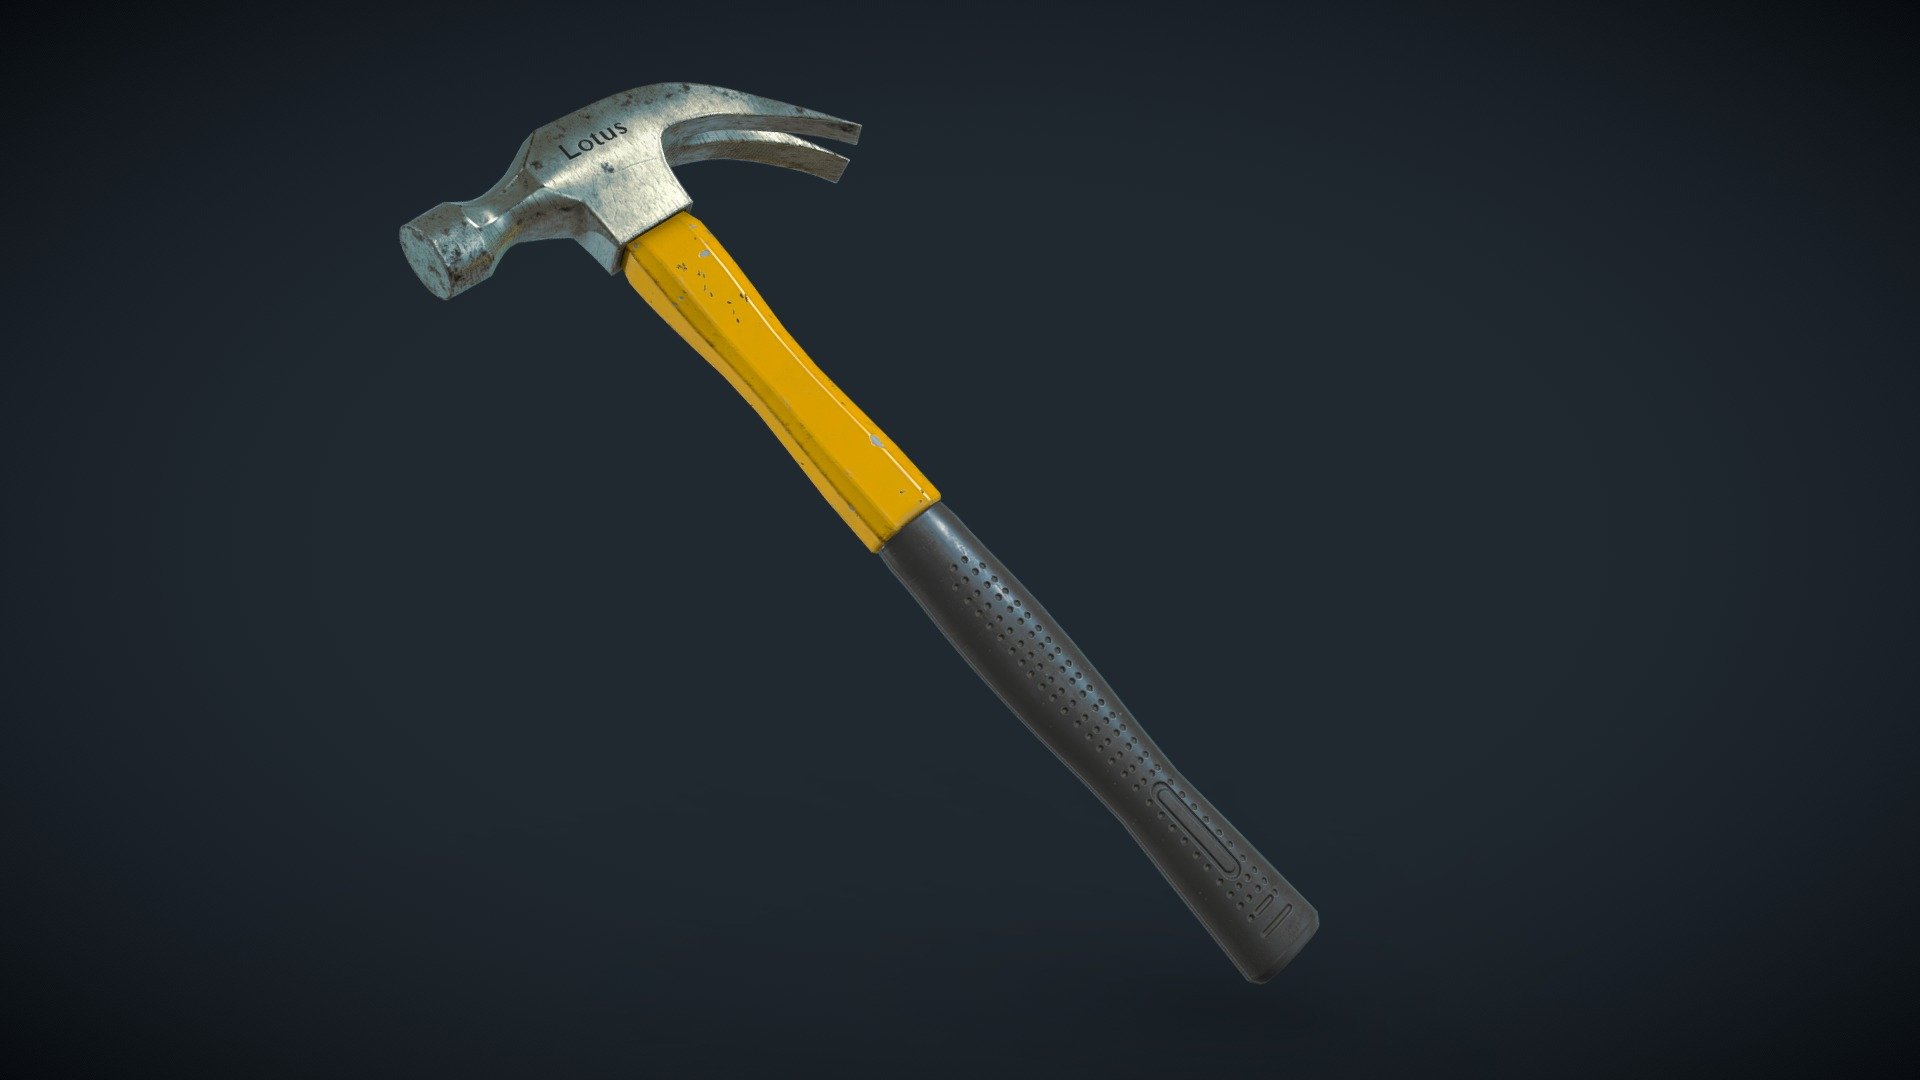 I modeled this hammer for the Tool assignment for Game Asset Pipeline.
This was modeled in Maya and textured in Substance Painter 3d model